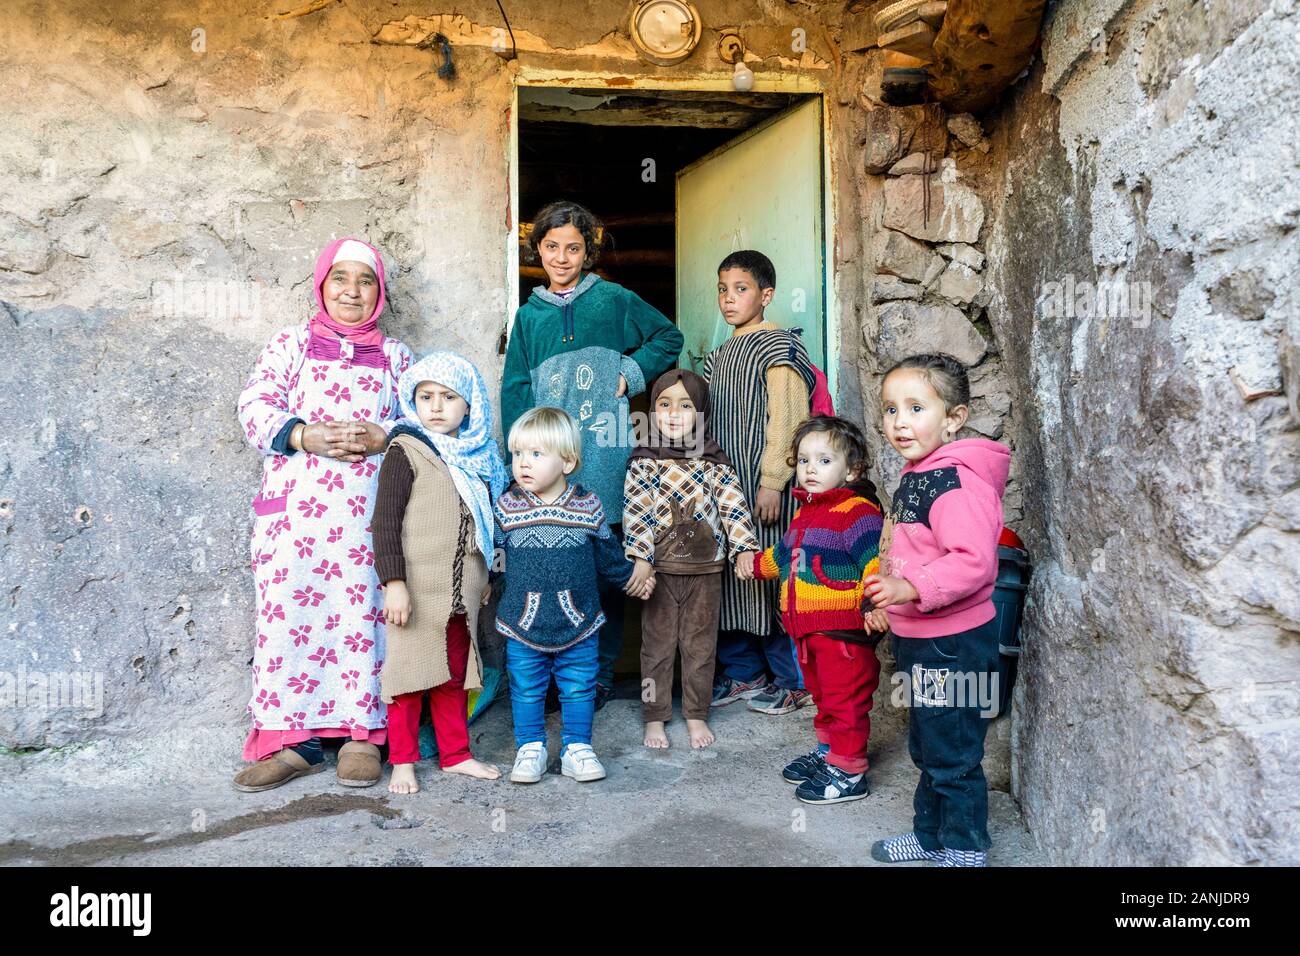 Aroumd, Morocco - January 7, 2020: Berber grandmother taking care of many kids in front of her house Stock Photo